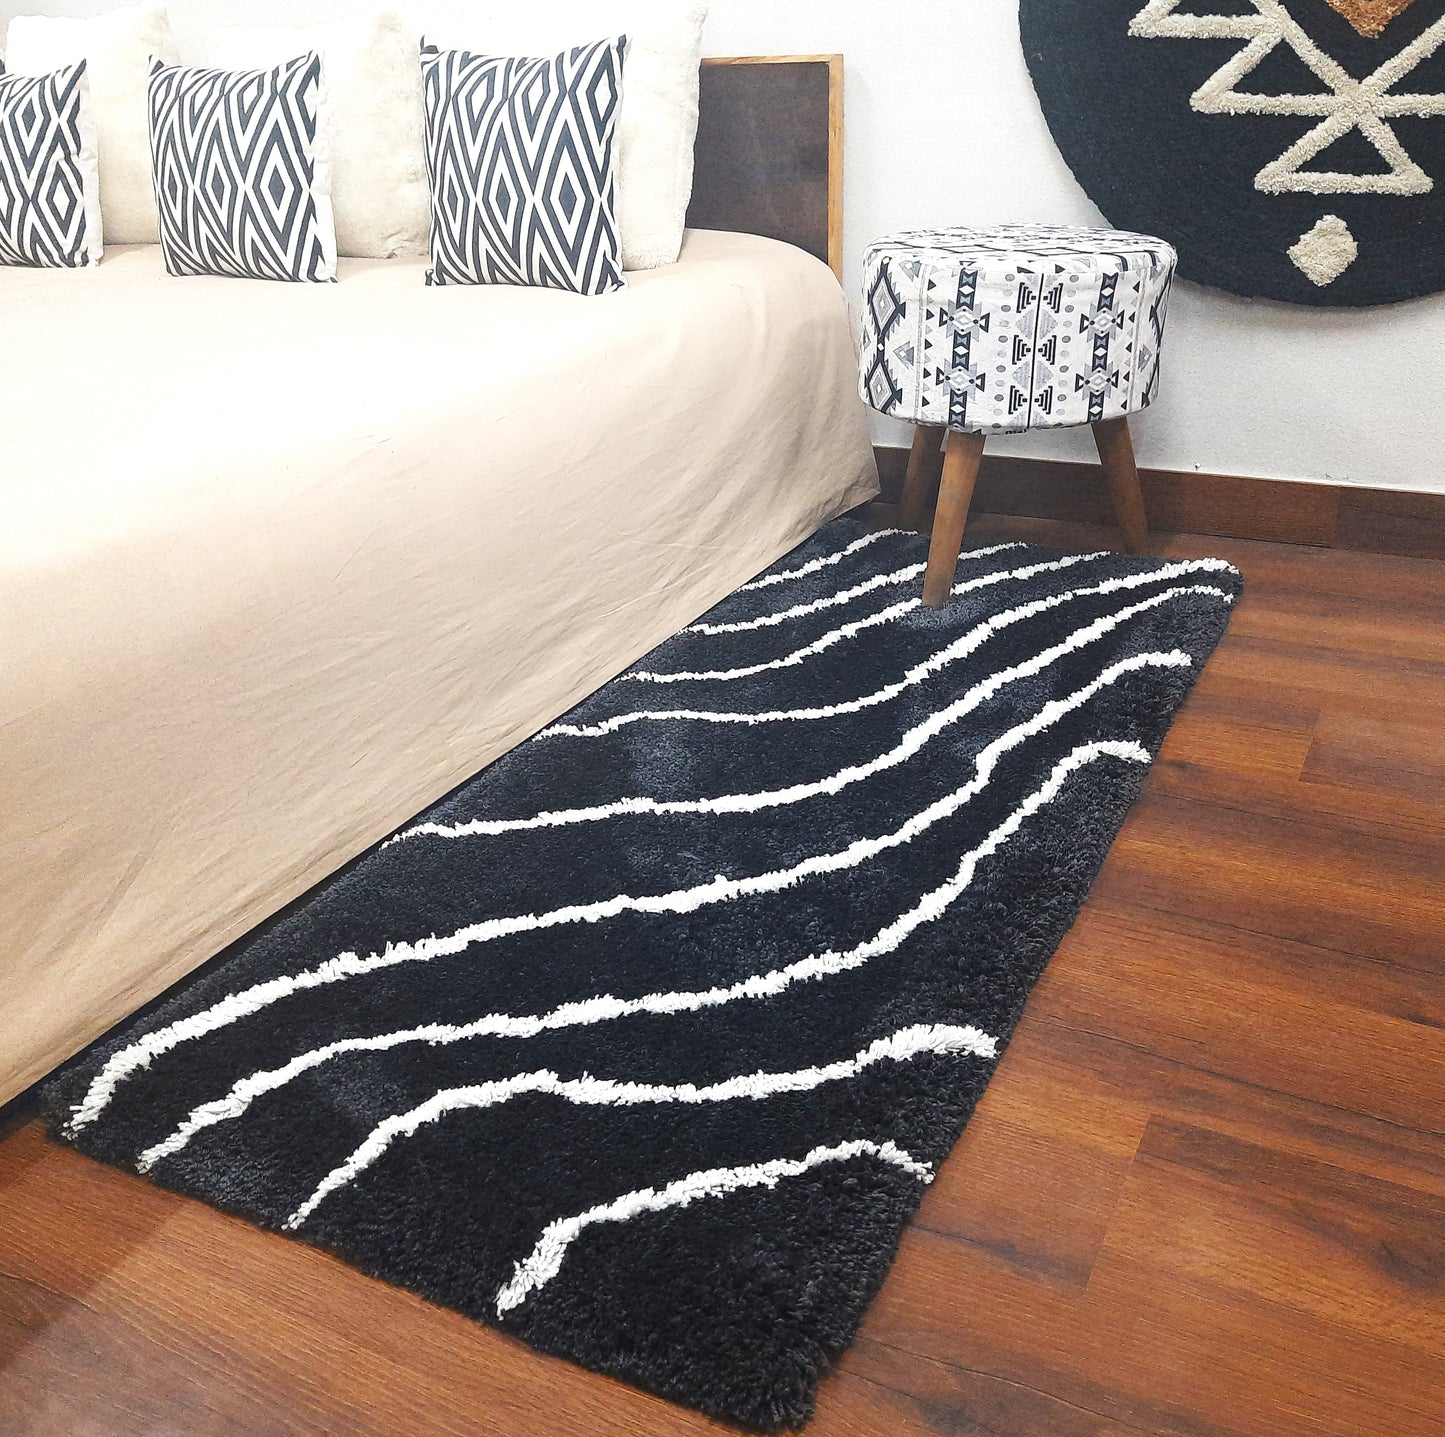 Plush Soft Washable Shaggy Black Carpet With White Wave Design /Bedside Runners by Avioni Home